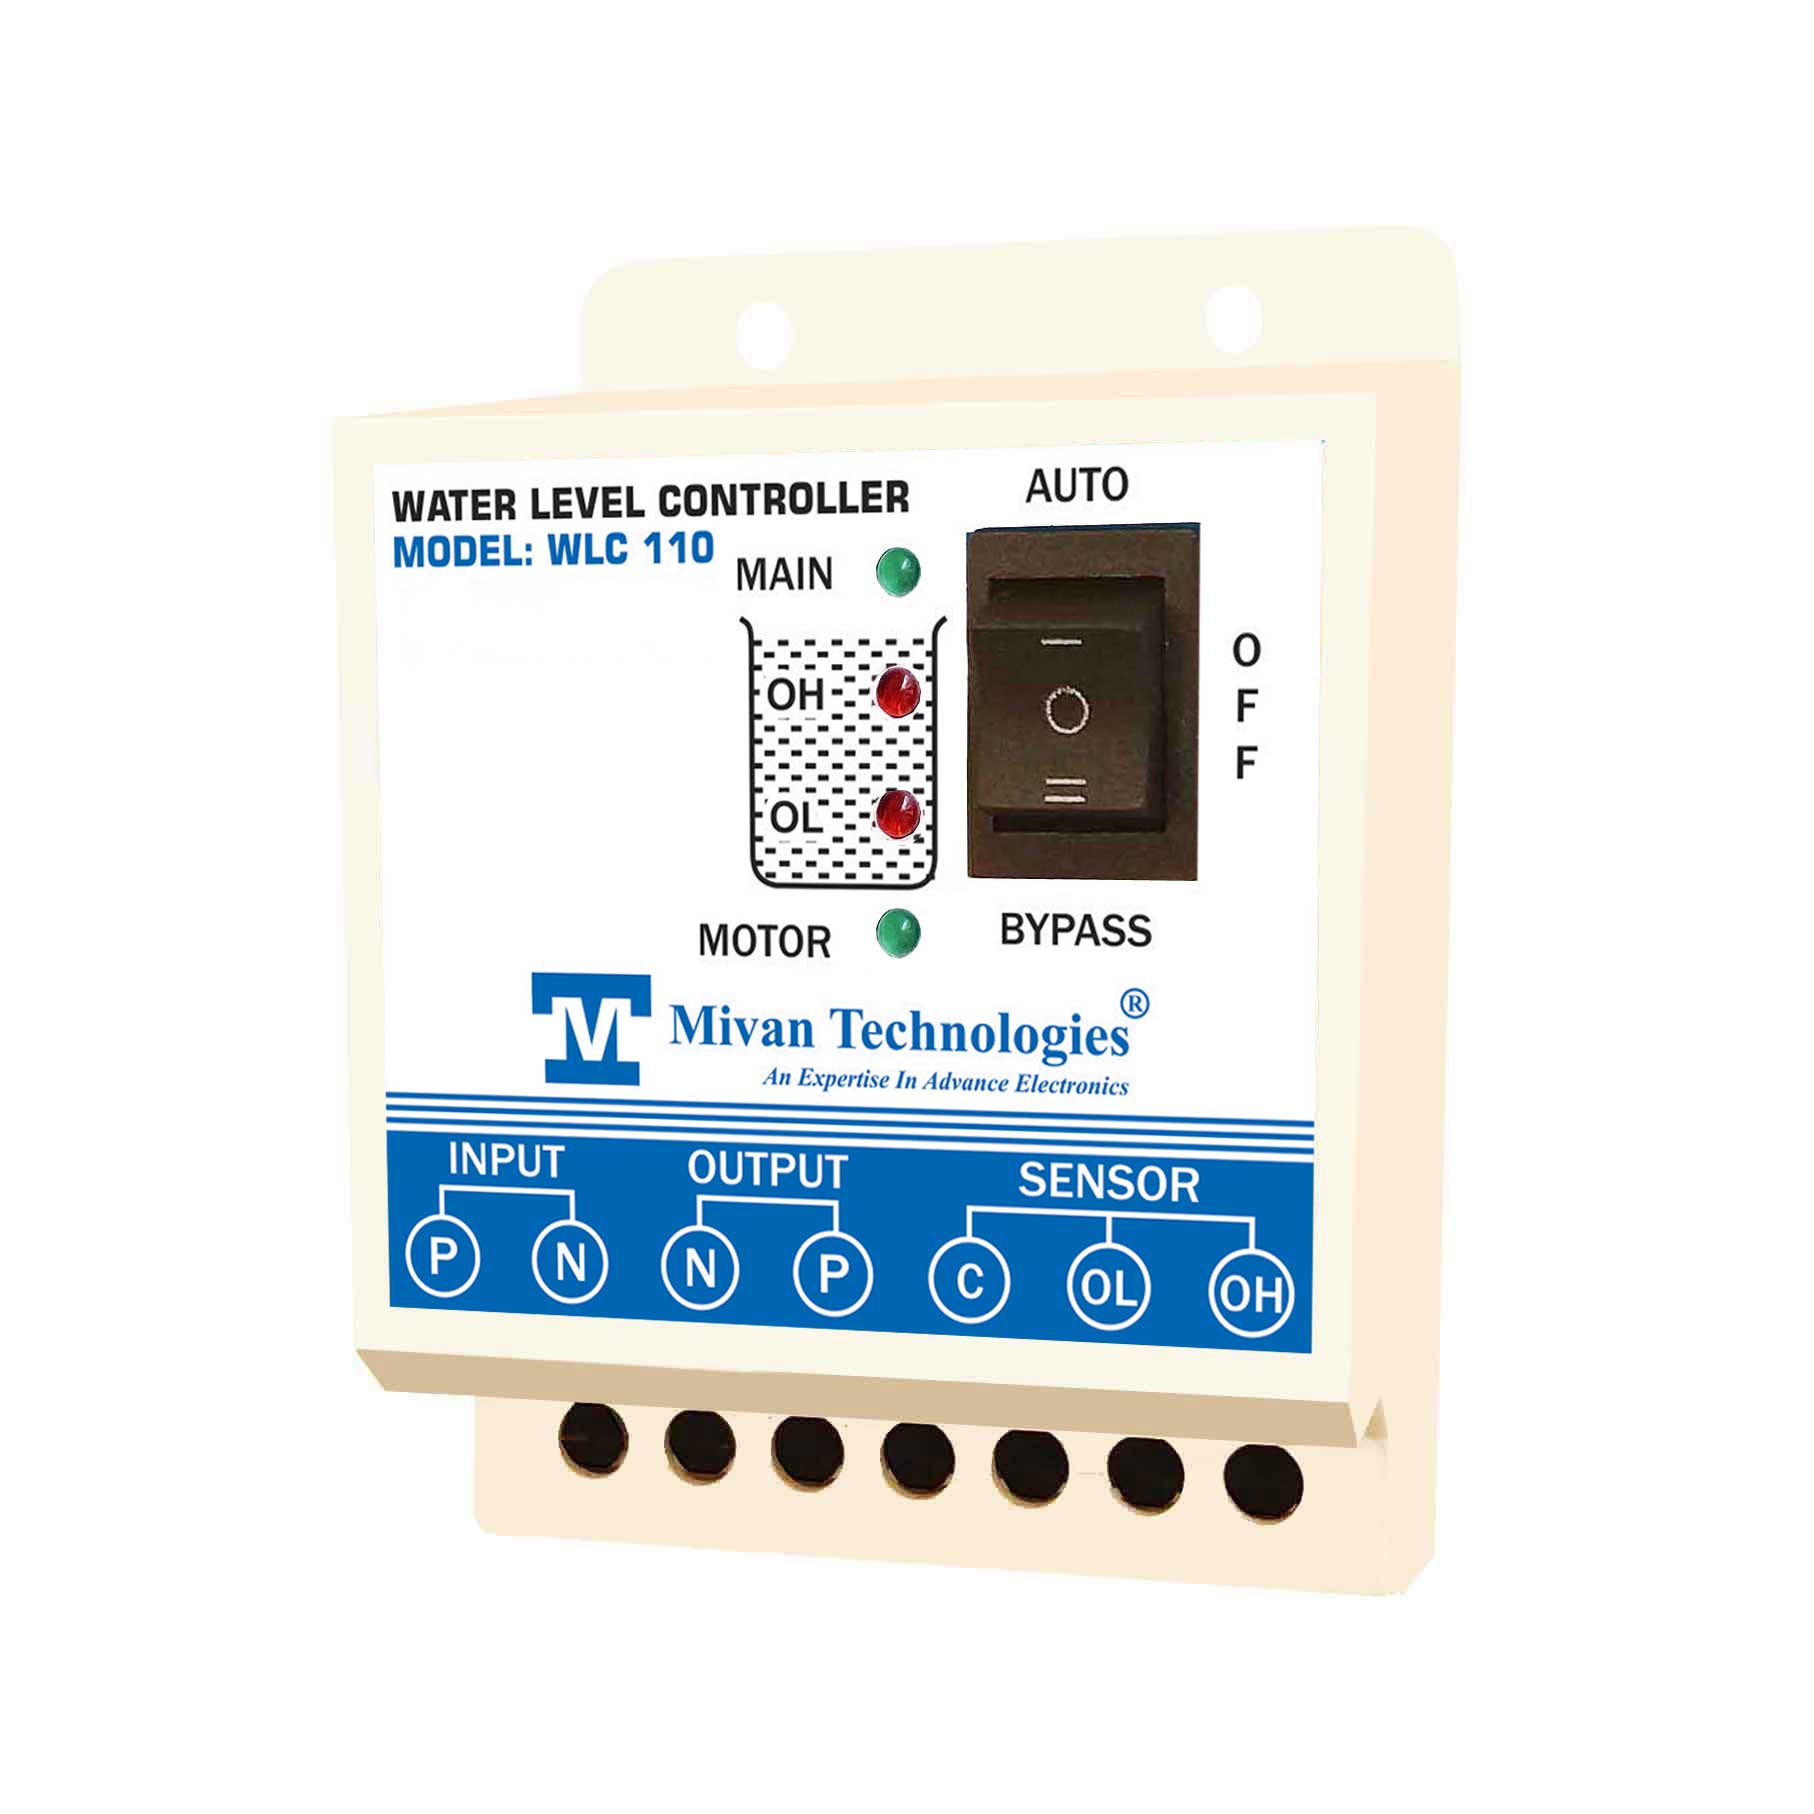 fully automatic Water Level Controller and 3 sensors with water level indications suitable up to 2 HP motor